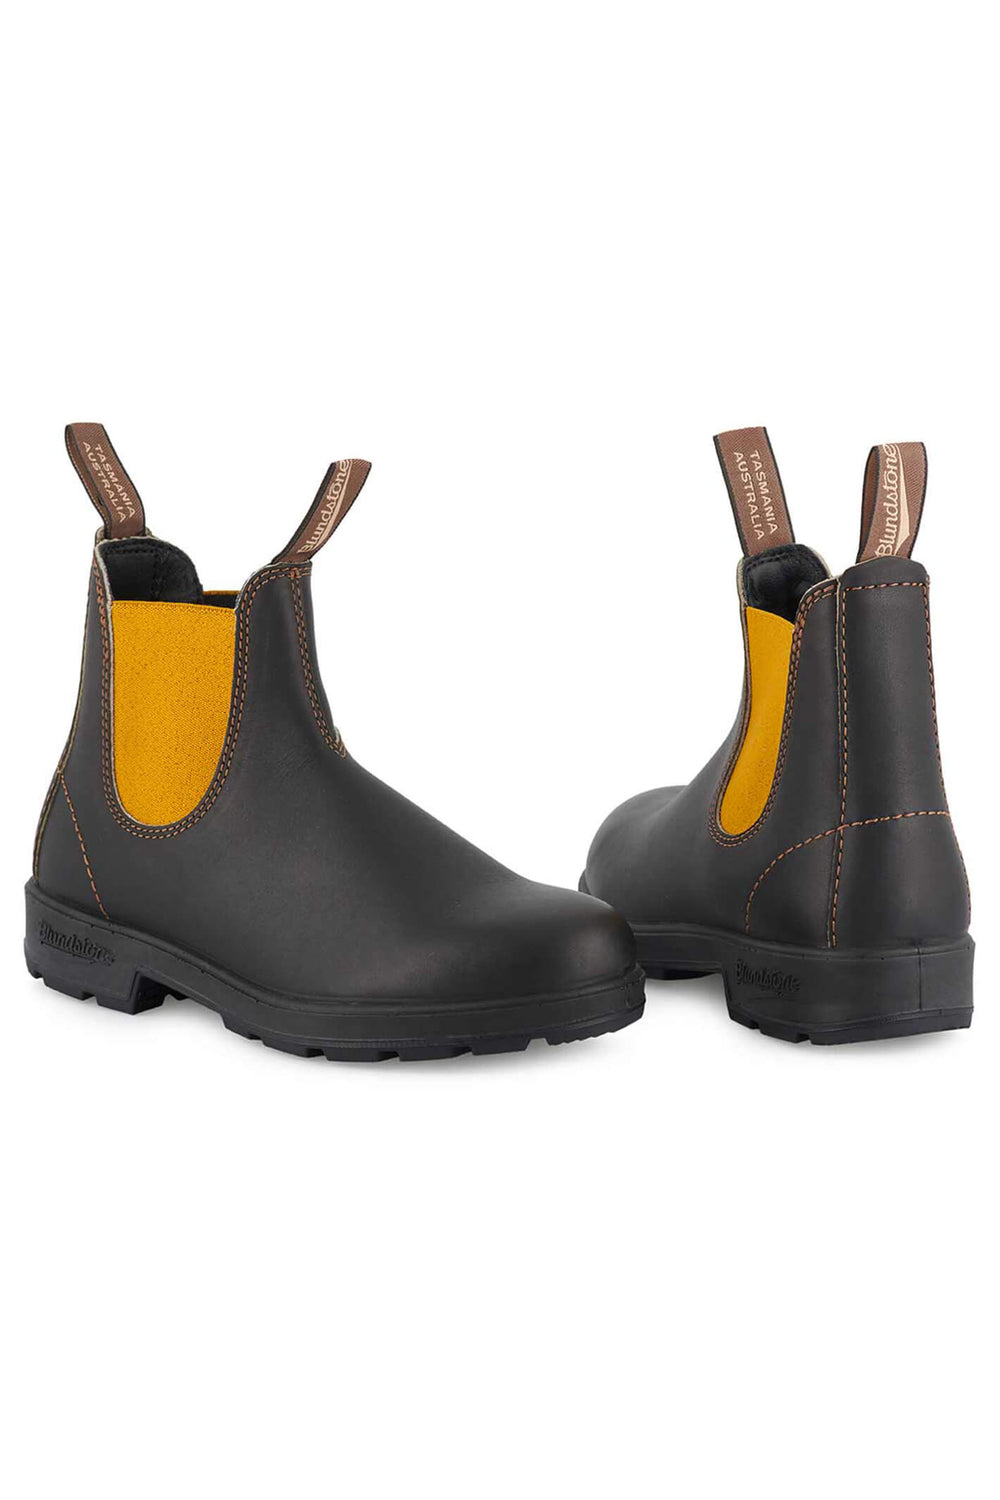 Blundstone 1919 Brown Mustard Leather Ankle Boot - Shirley Allum Boutique